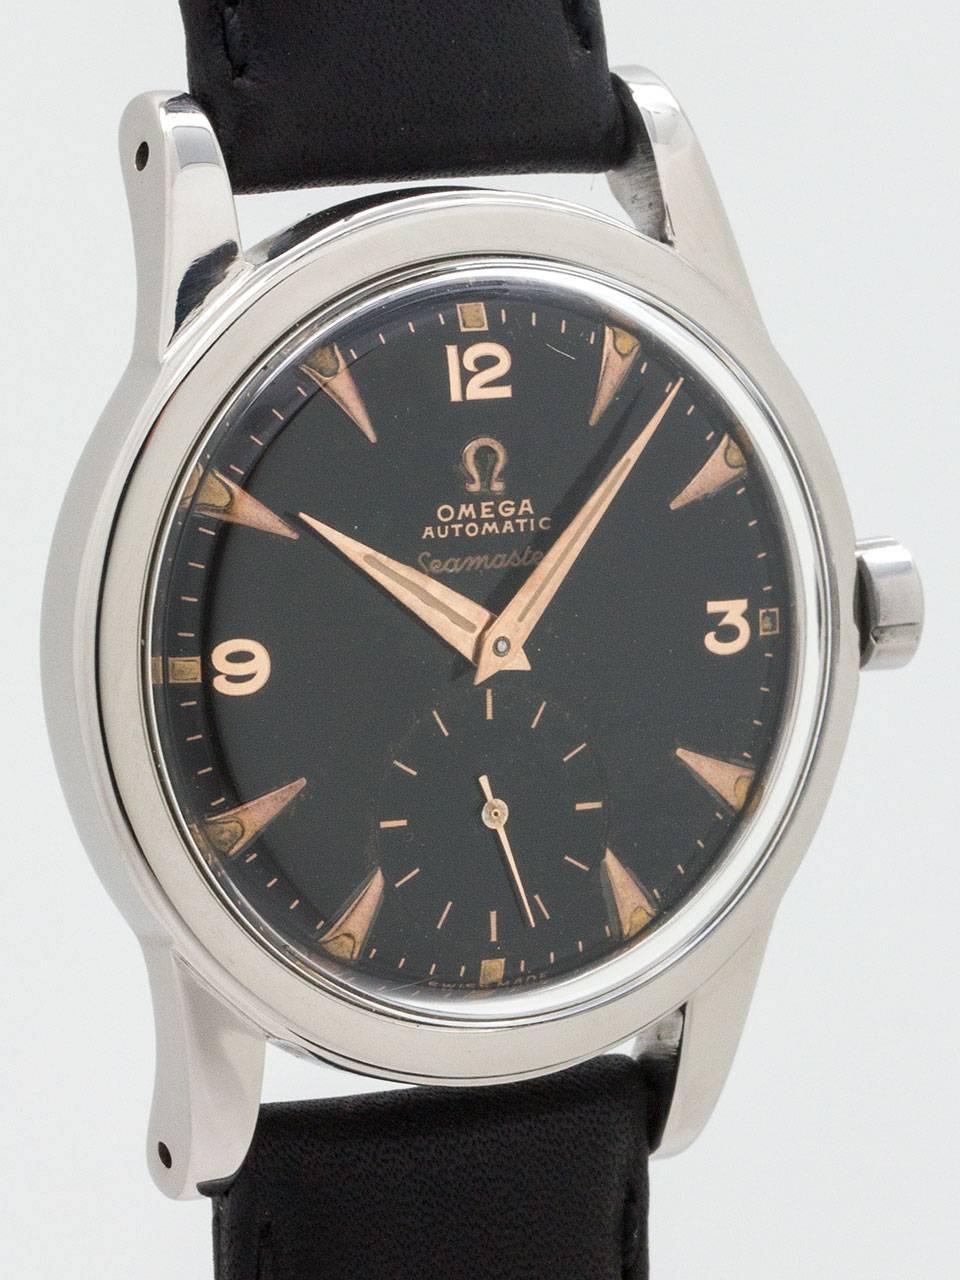 Vintage Omega Seamaster ref 2576-12 circa 1951. 34 x 42mm stainless steel case with screw down case back, acrylic crystal and signed Omega crown. Very pleasing original gloss black dial applied Omega logo, patina’d luminous dots, pink printing and